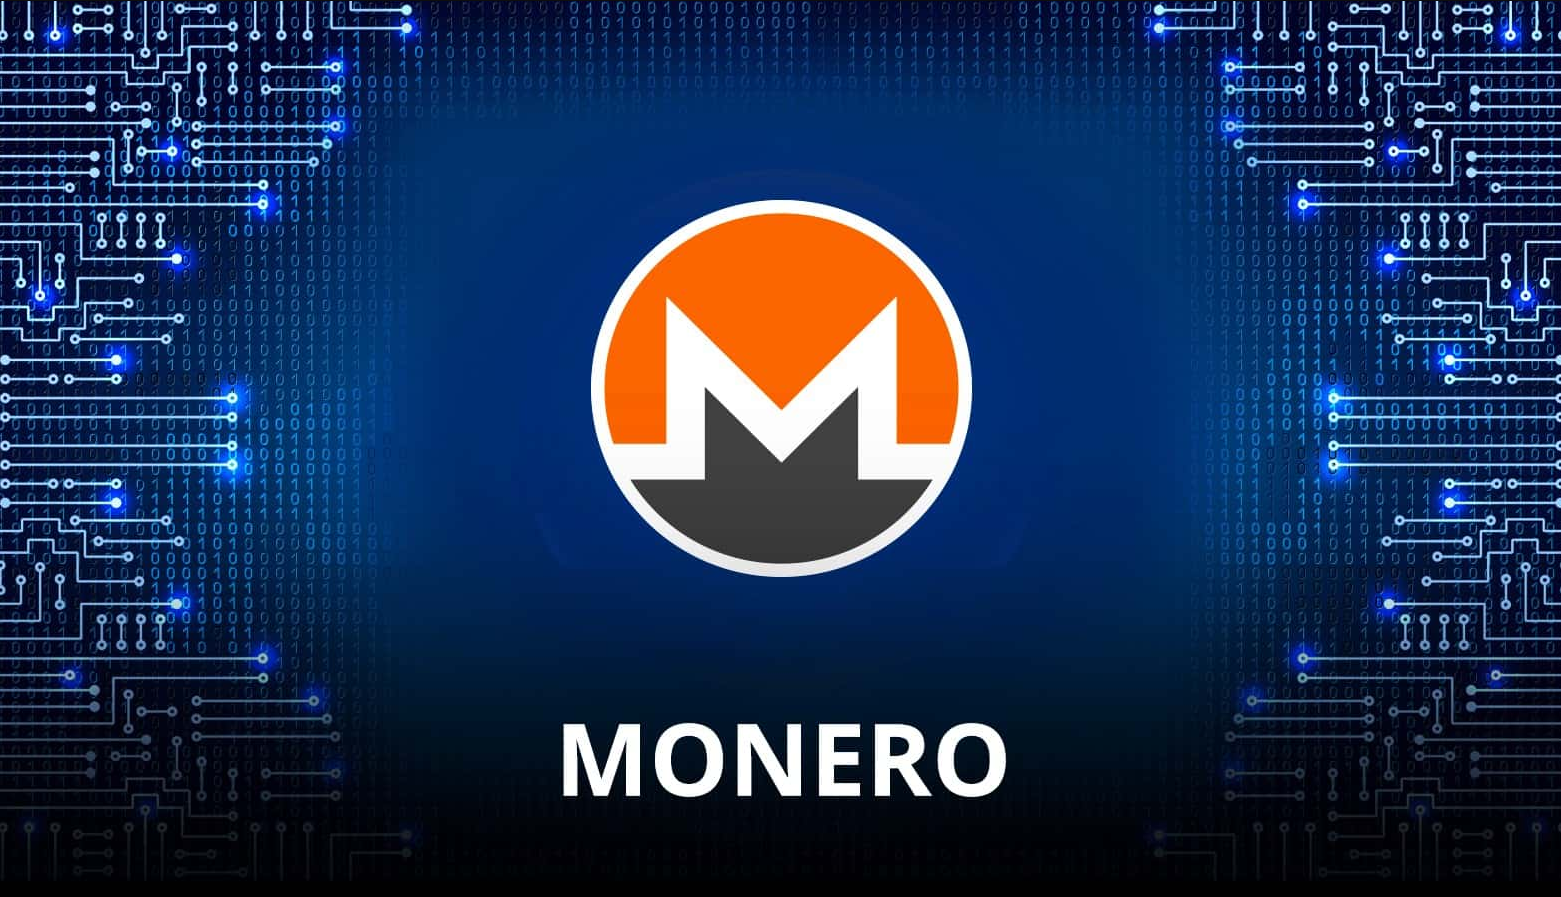 Planning on Using Monero? Here are 7 Terms You Need to Know